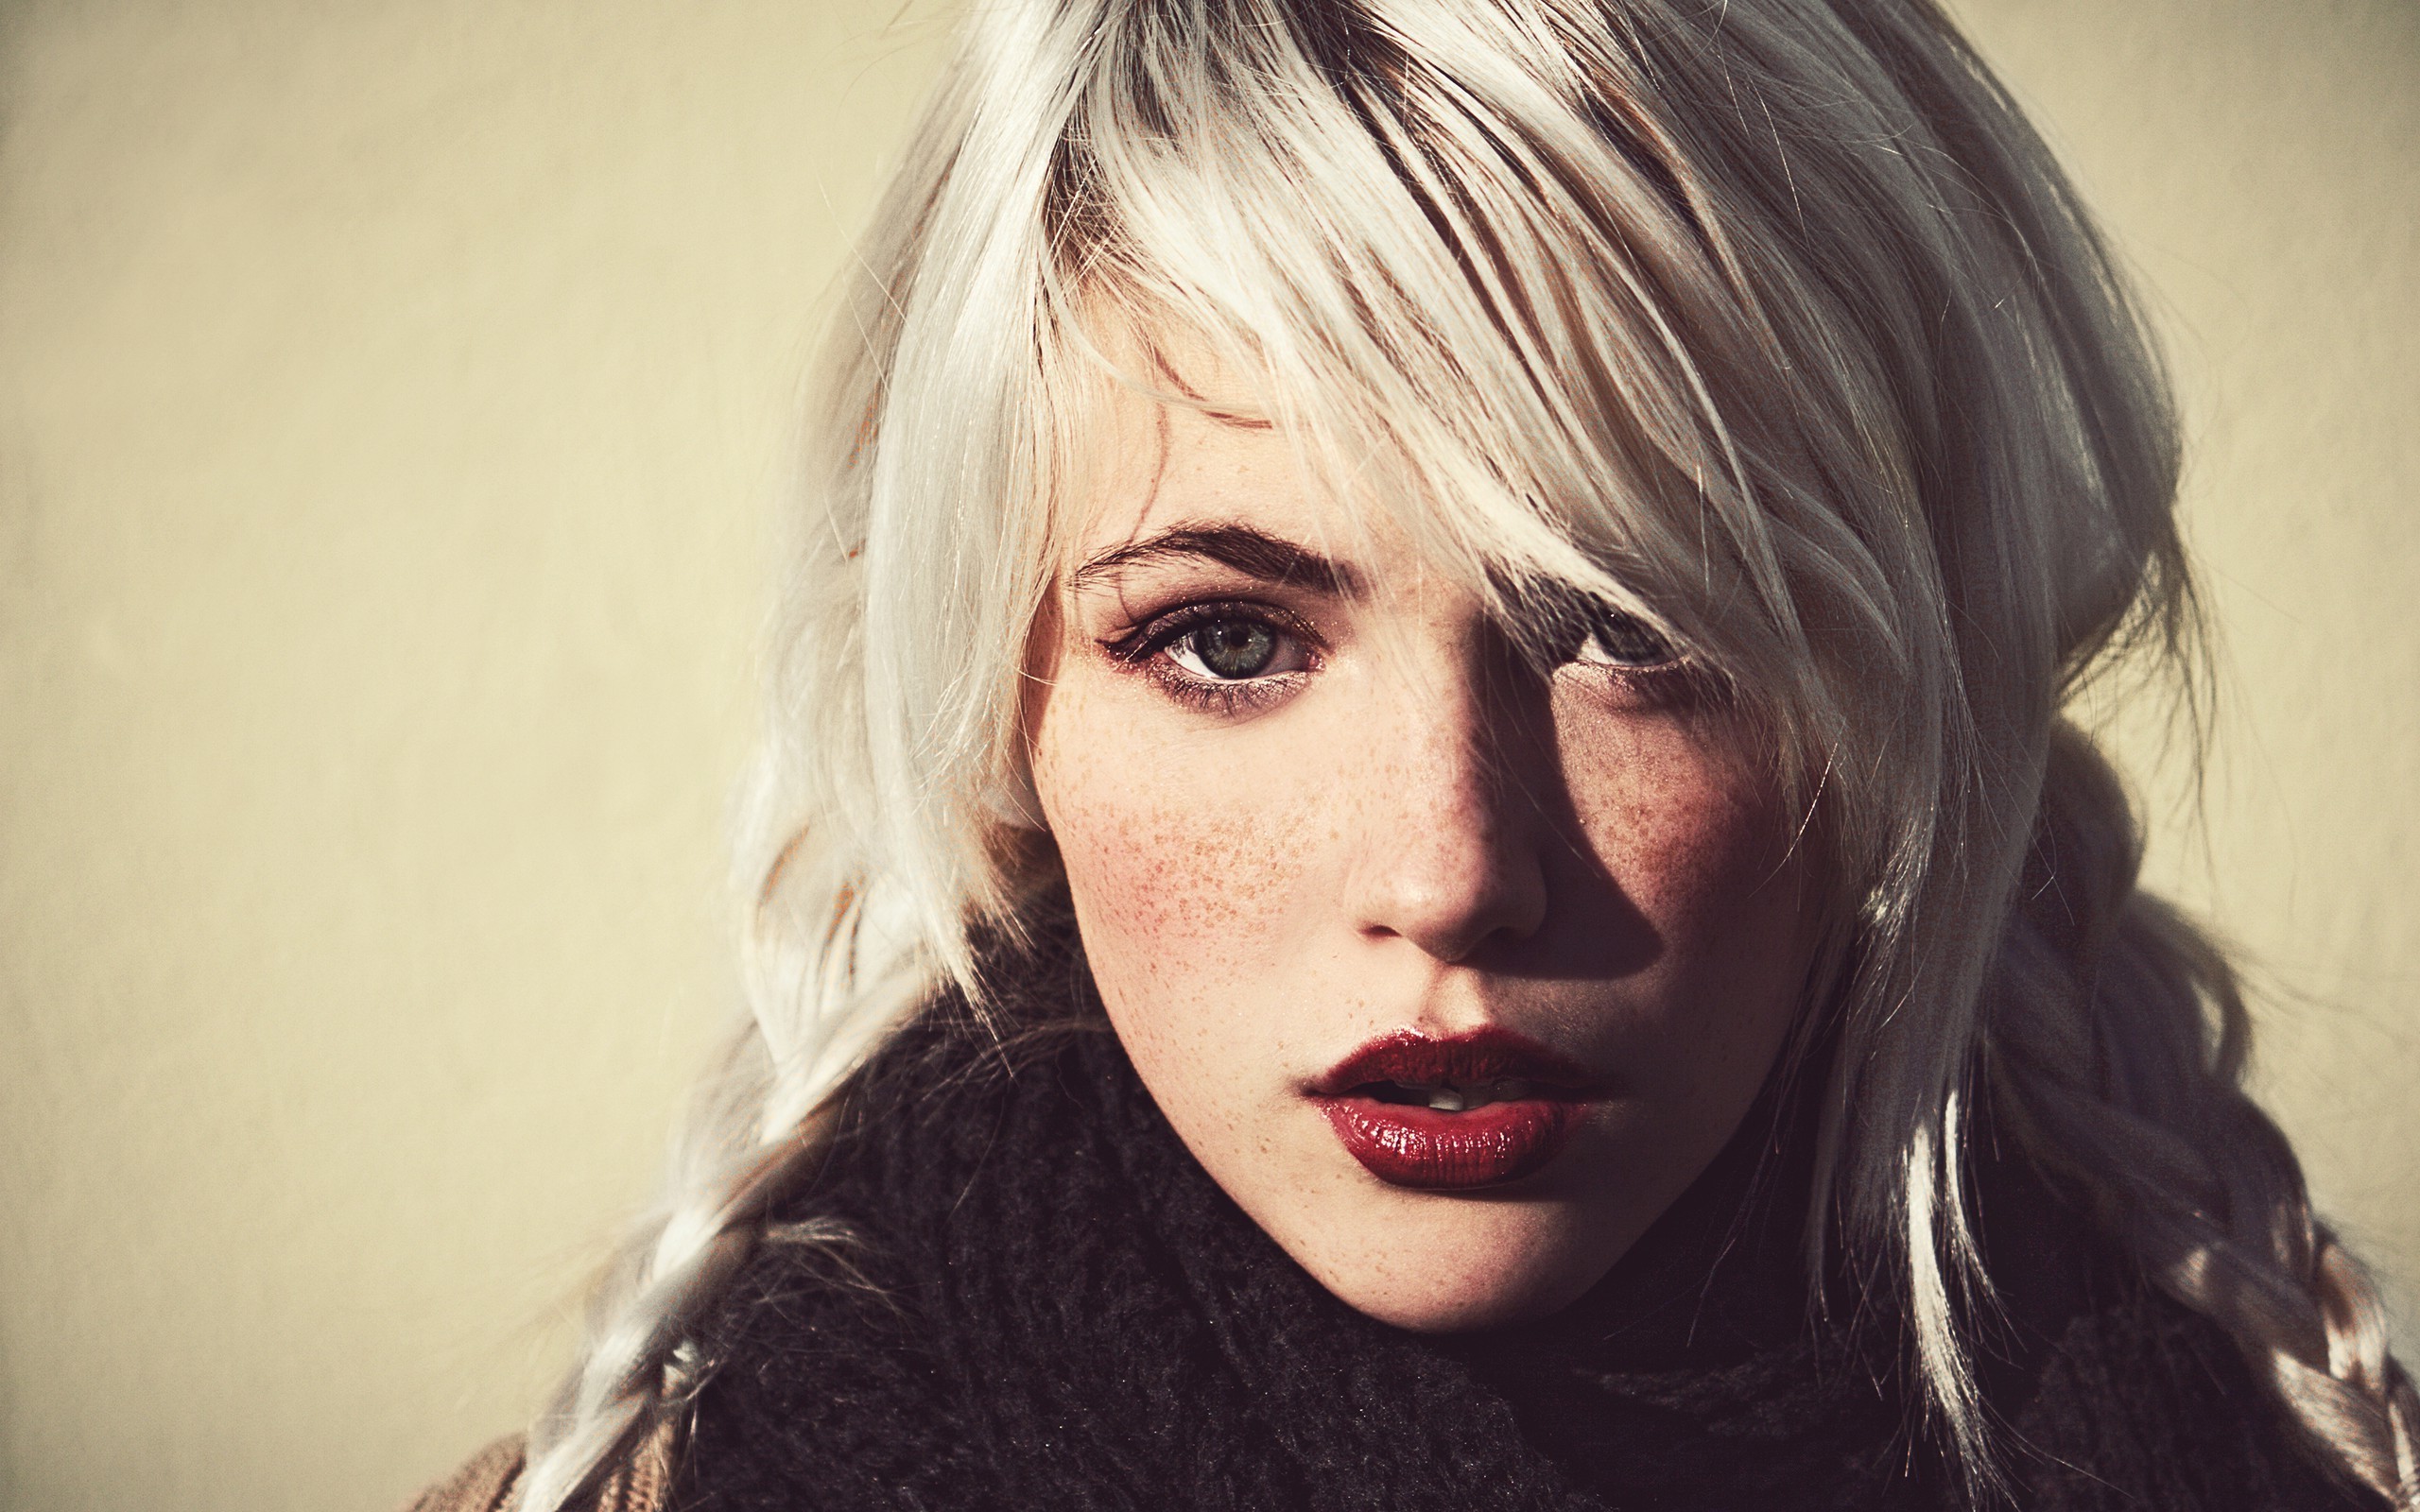 Platinum Blonde Hair And Freckles - HD Wallpaper 